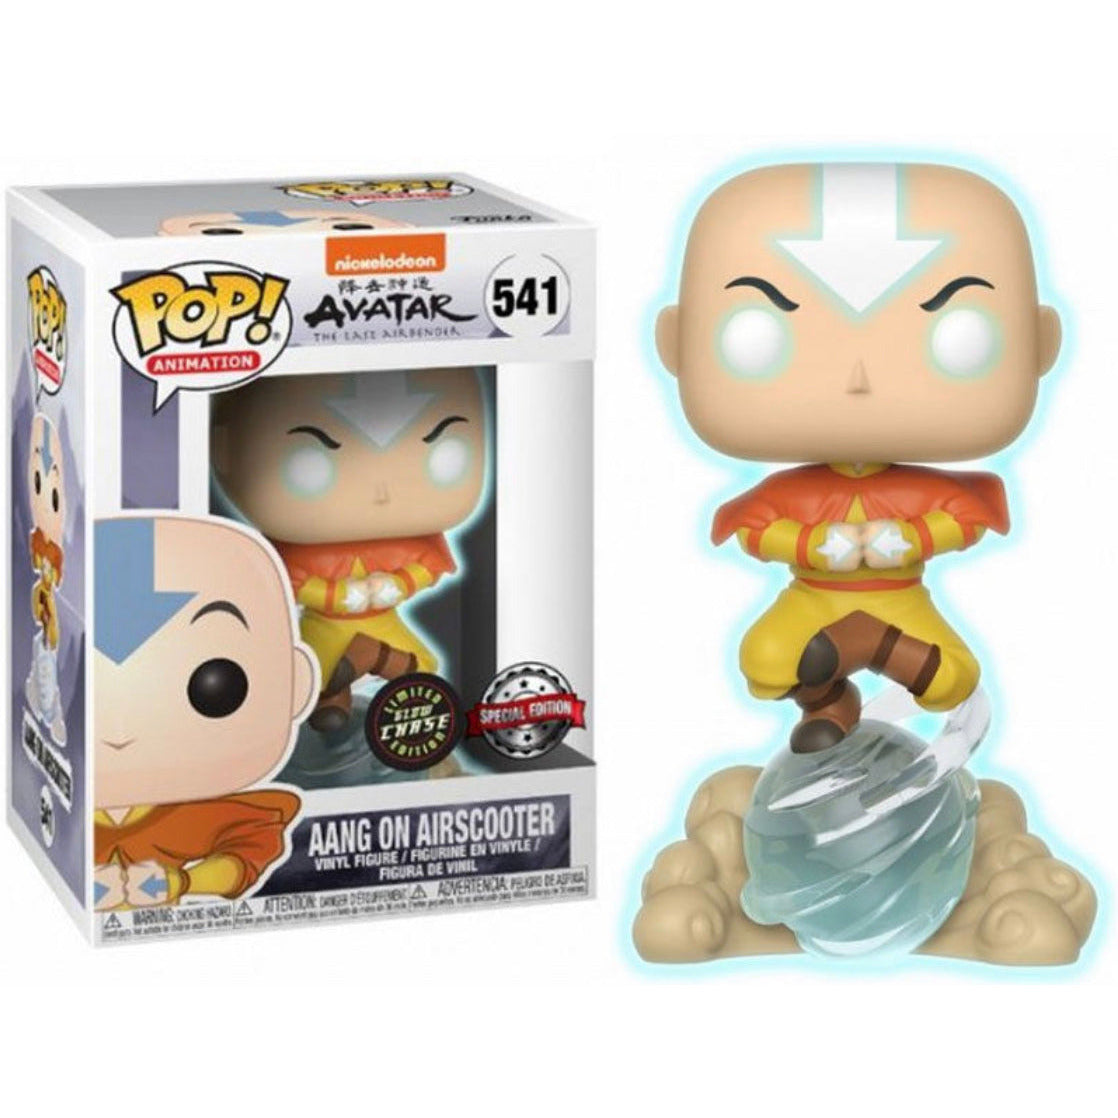 FUNKO POP! AVATAR THE LAST AIRBENDER AANG ON AIRSCOOTER 541